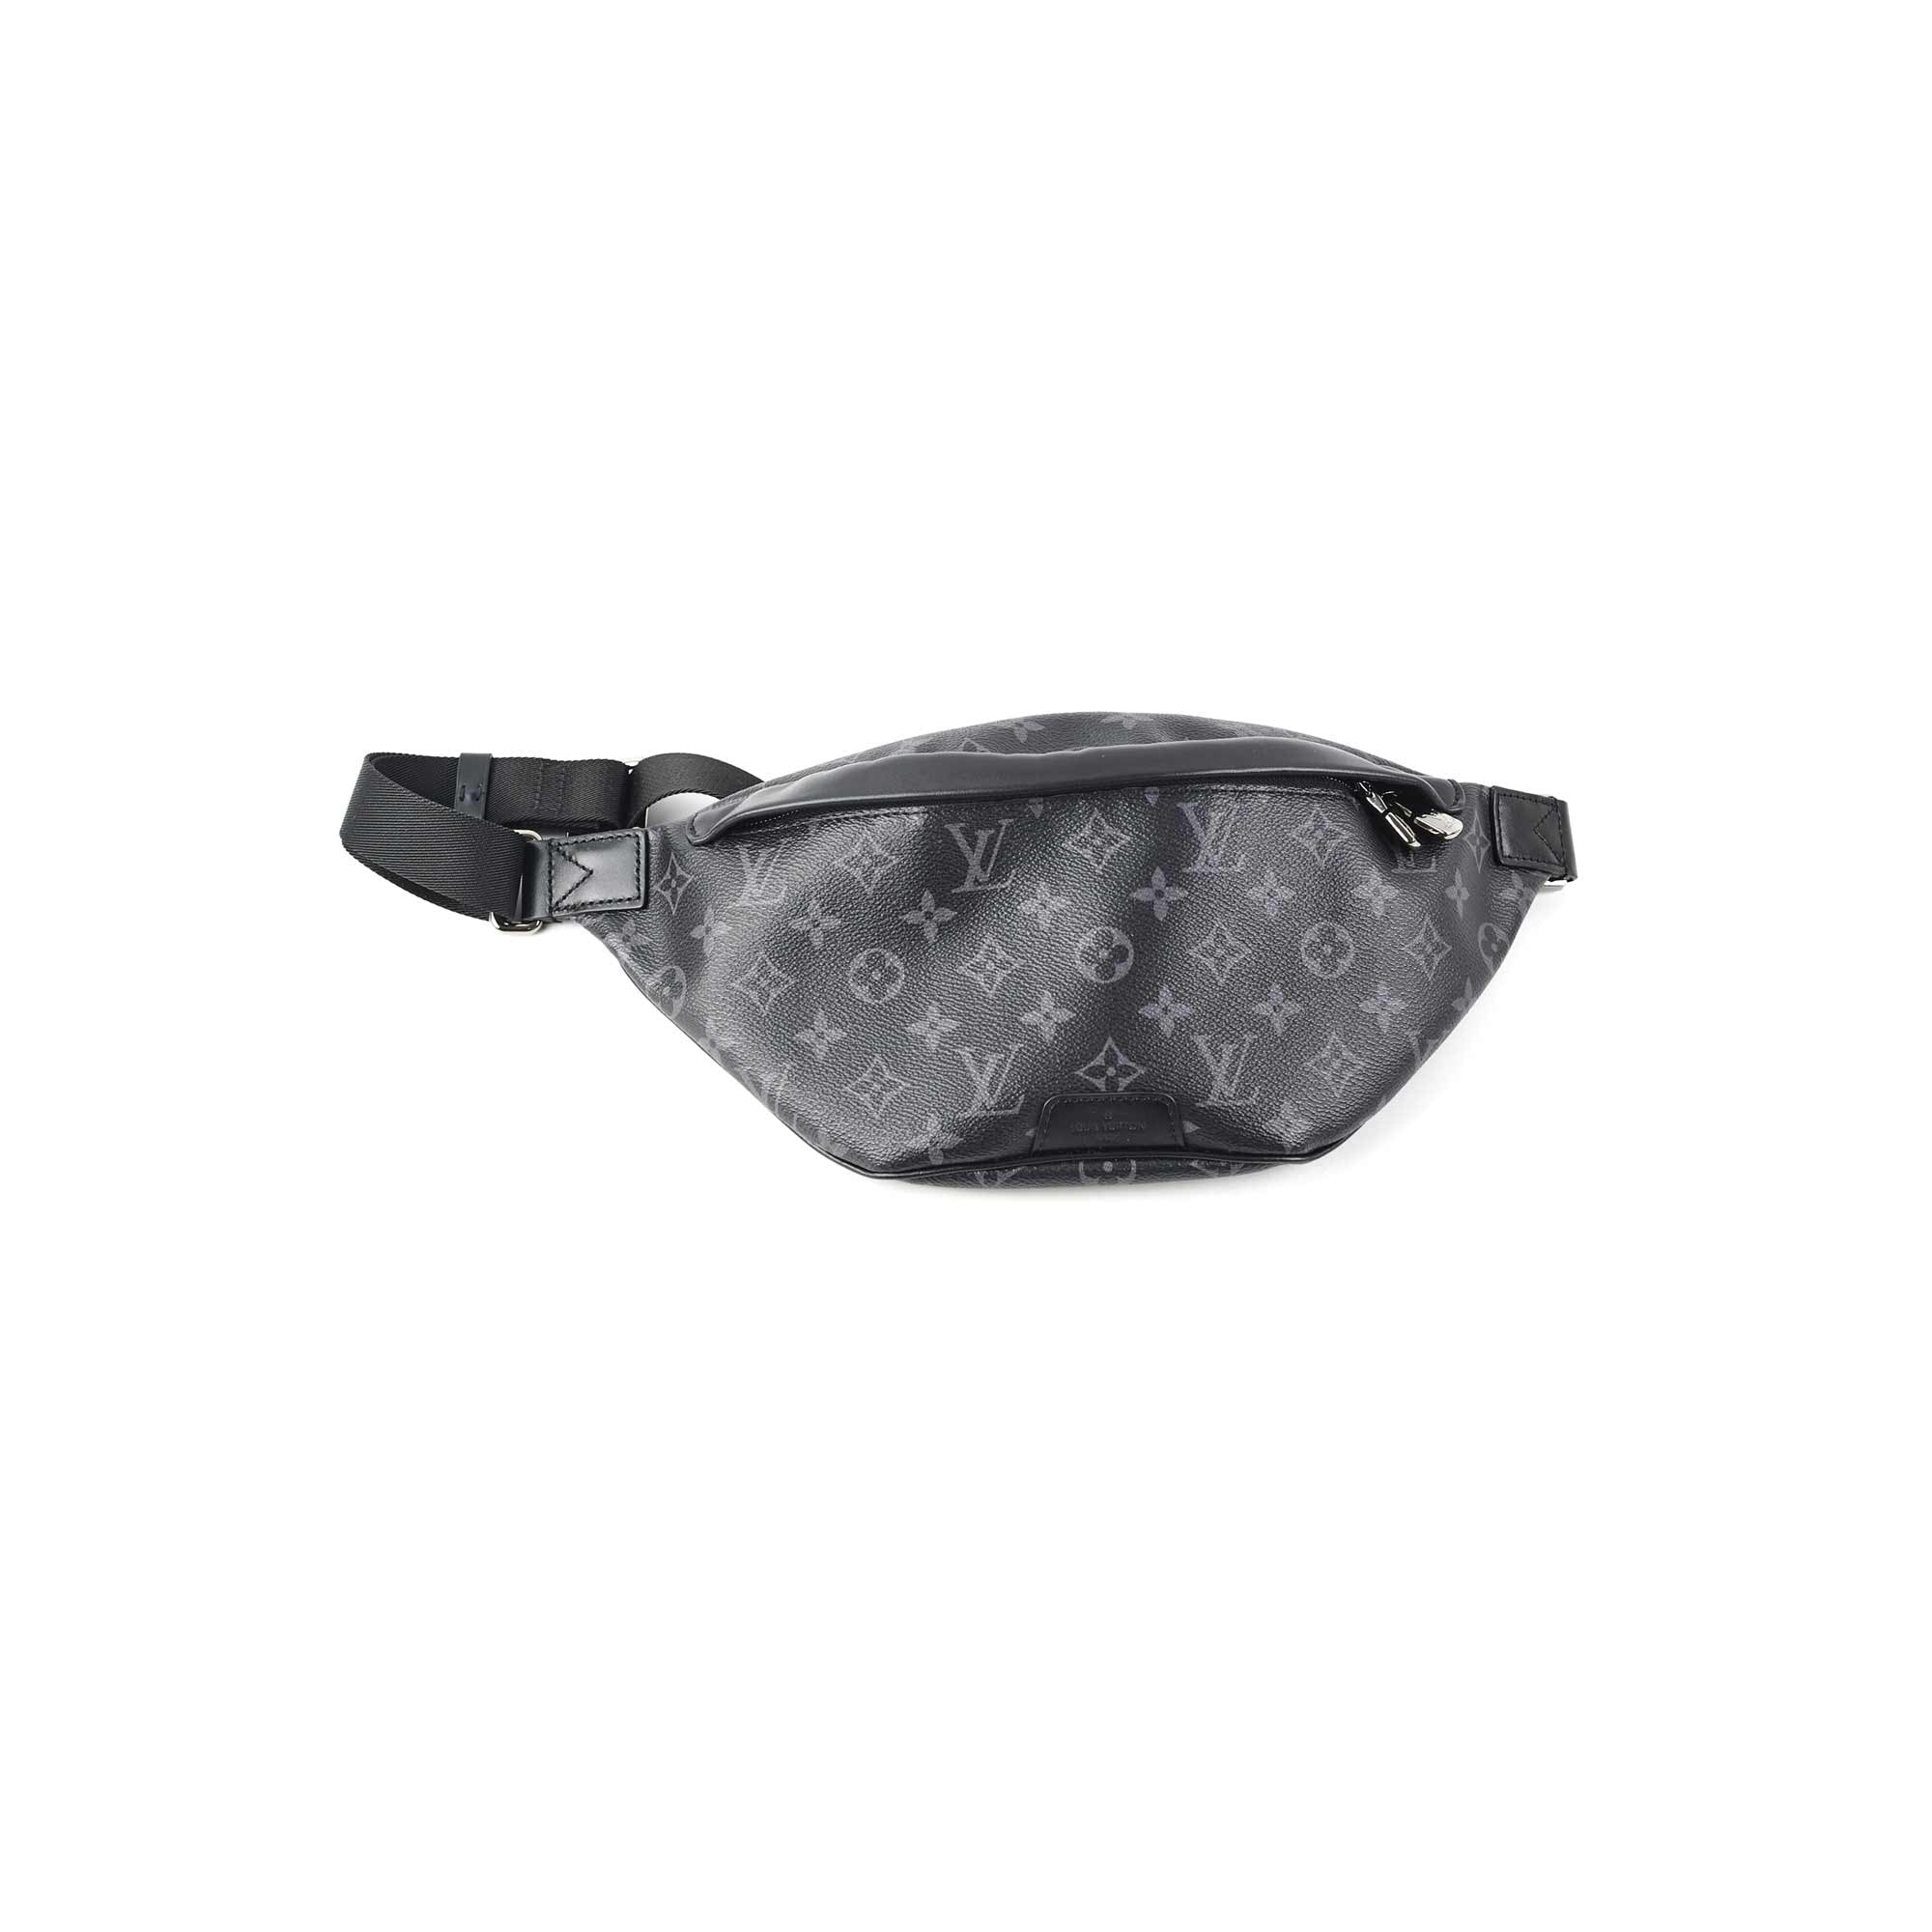 Shop Louis Vuitton Discovery Discovery bumbag pm (M46036) by Bellaris